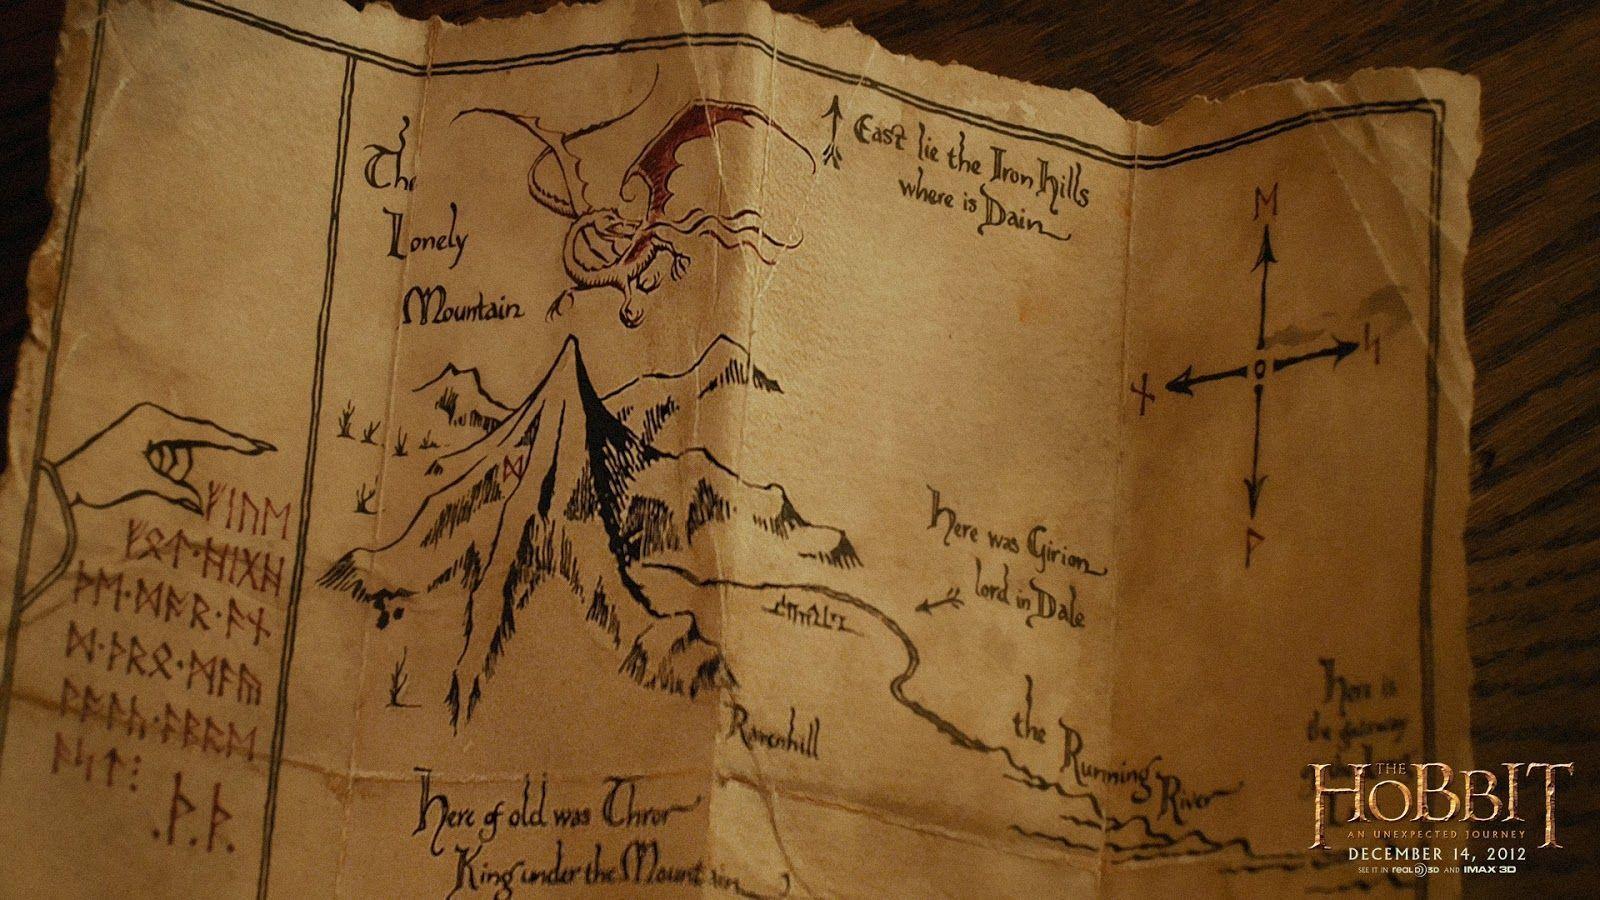 Lord Of The Rings Map Wallpaper